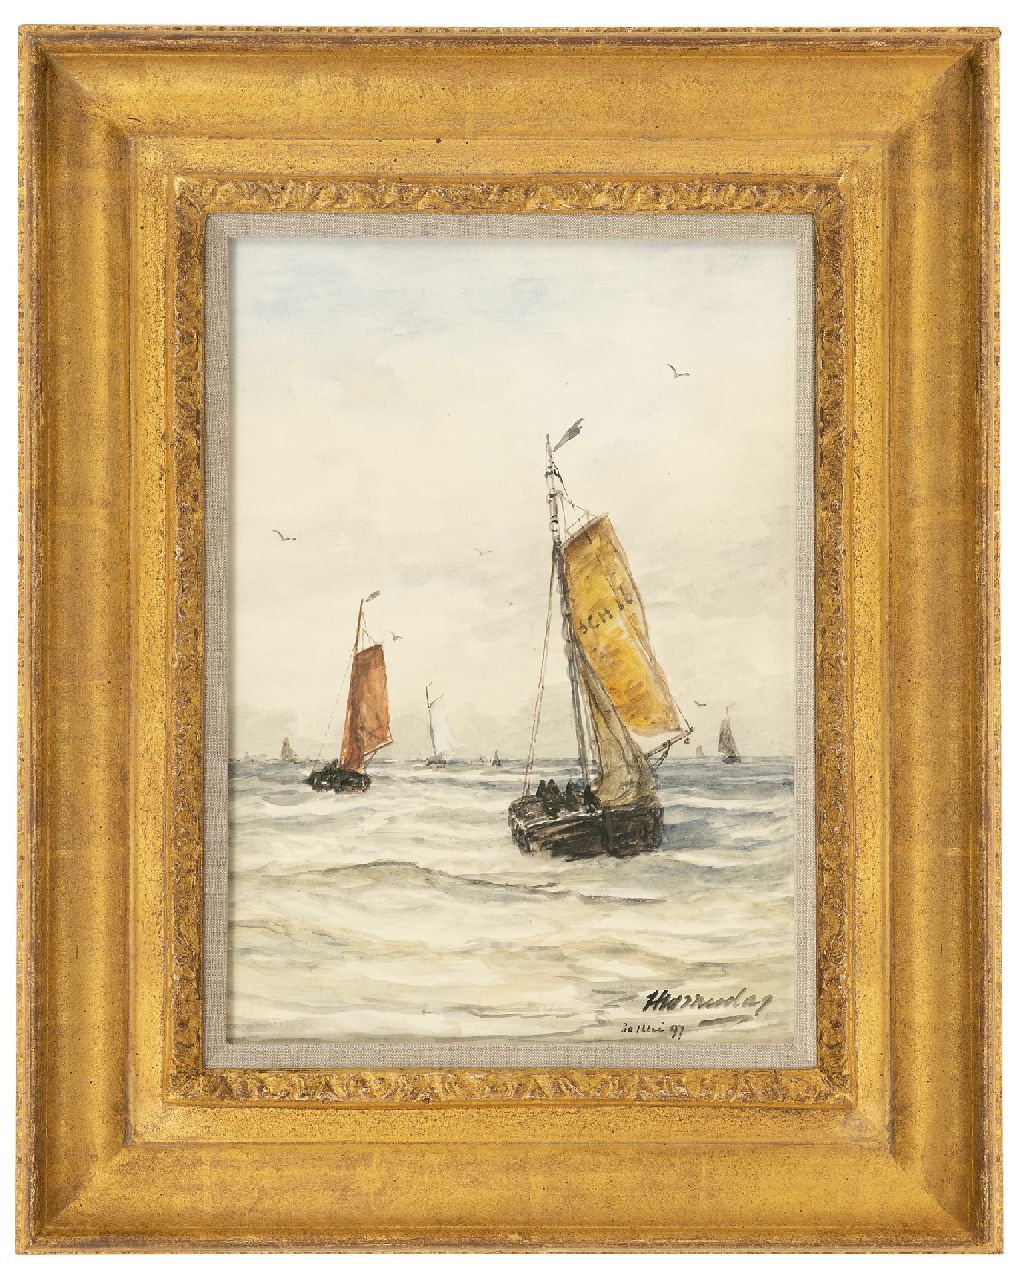 Mesdag H.W.  | Hendrik Willem Mesdag, After the storm at Scheveningen, watercolour and gouache on paper 36.6 x 26.7 cm, signed l.r. and dated 30 Mei 97